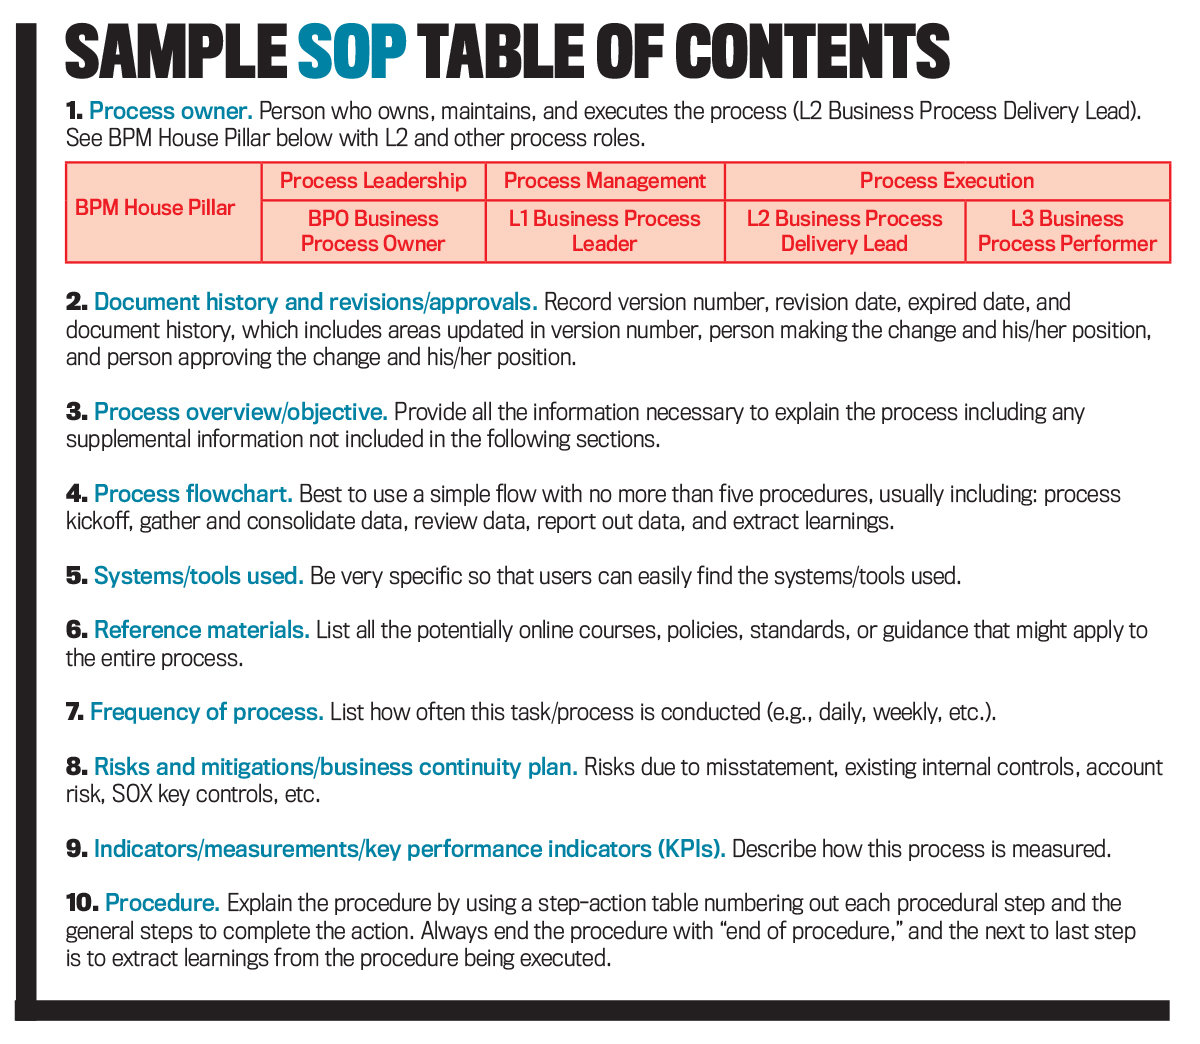 a simple sop table of content